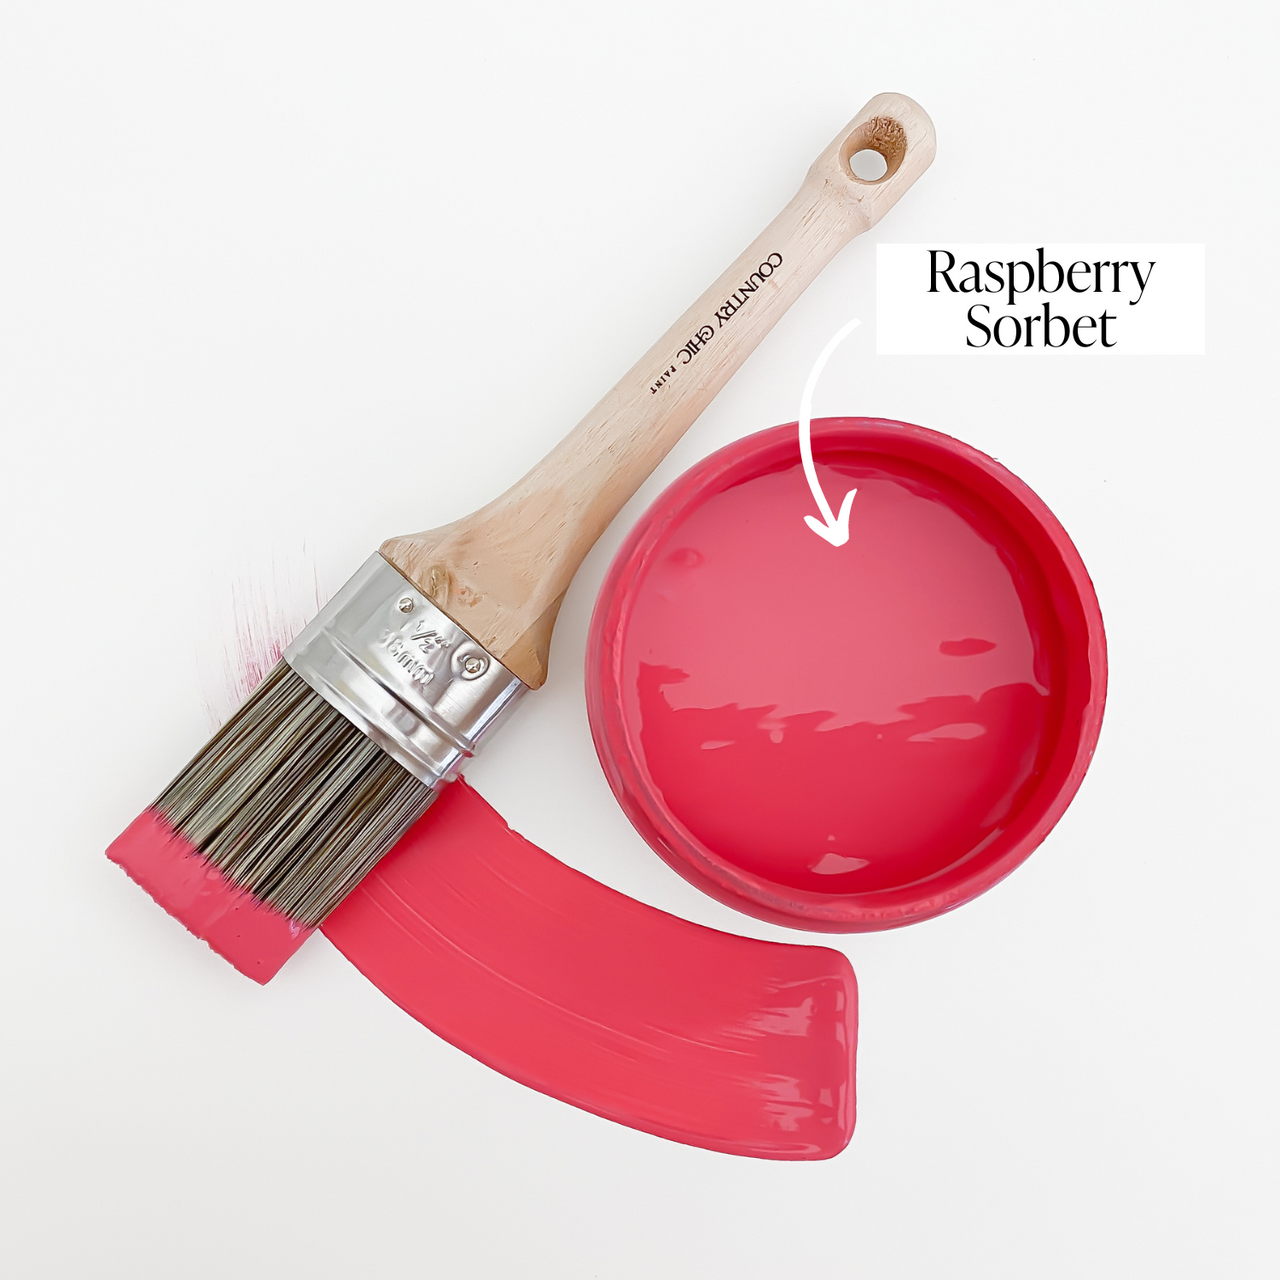 Raspberry Sorbet - Chalk Style Paint for Furniture, Home Decor, DIY,  Cabinets, Crafts